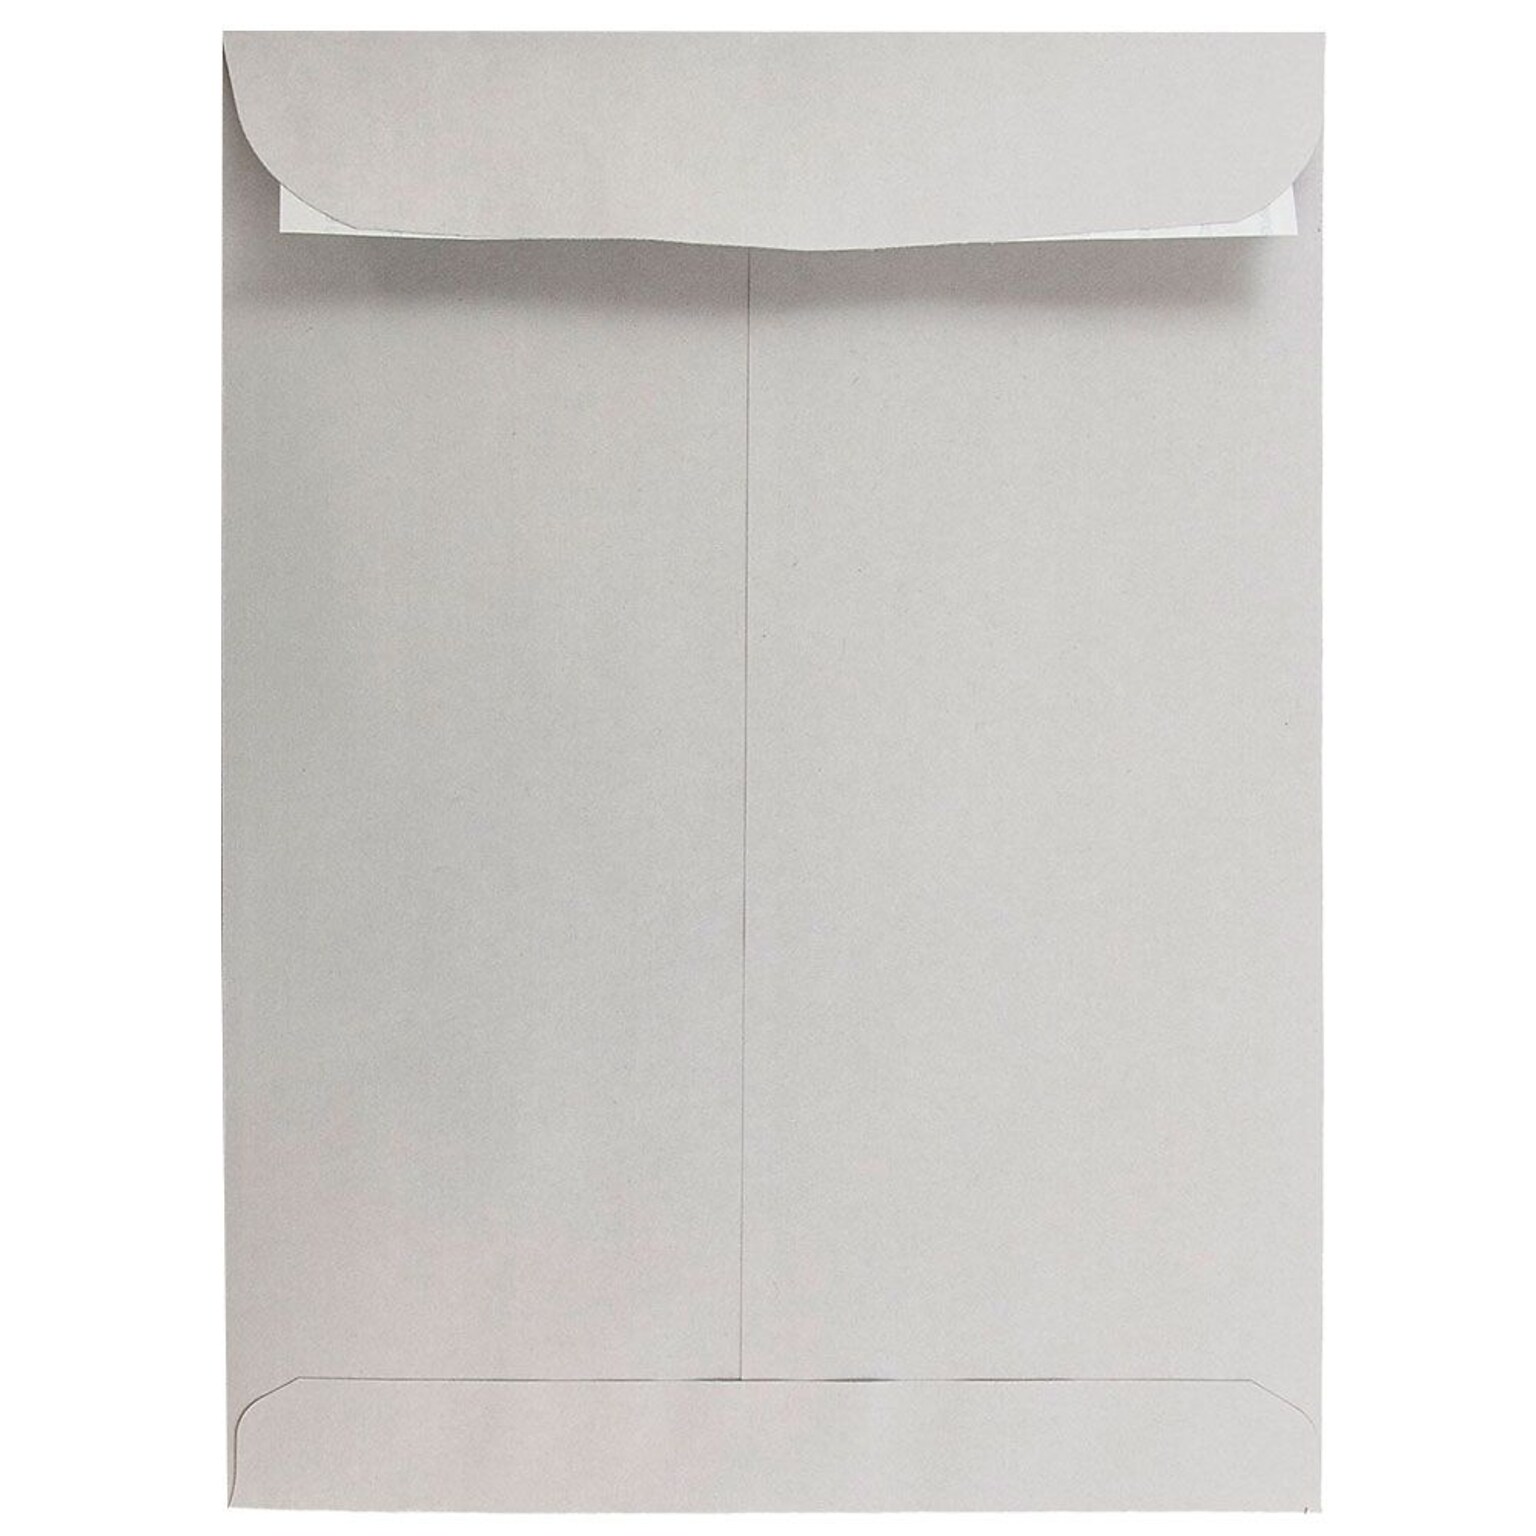 JAM Paper 9 x 12 Open End Catalog Envelopes with Peel and Seal Closure, Light Grey, Bulk 500/Box (12931115)